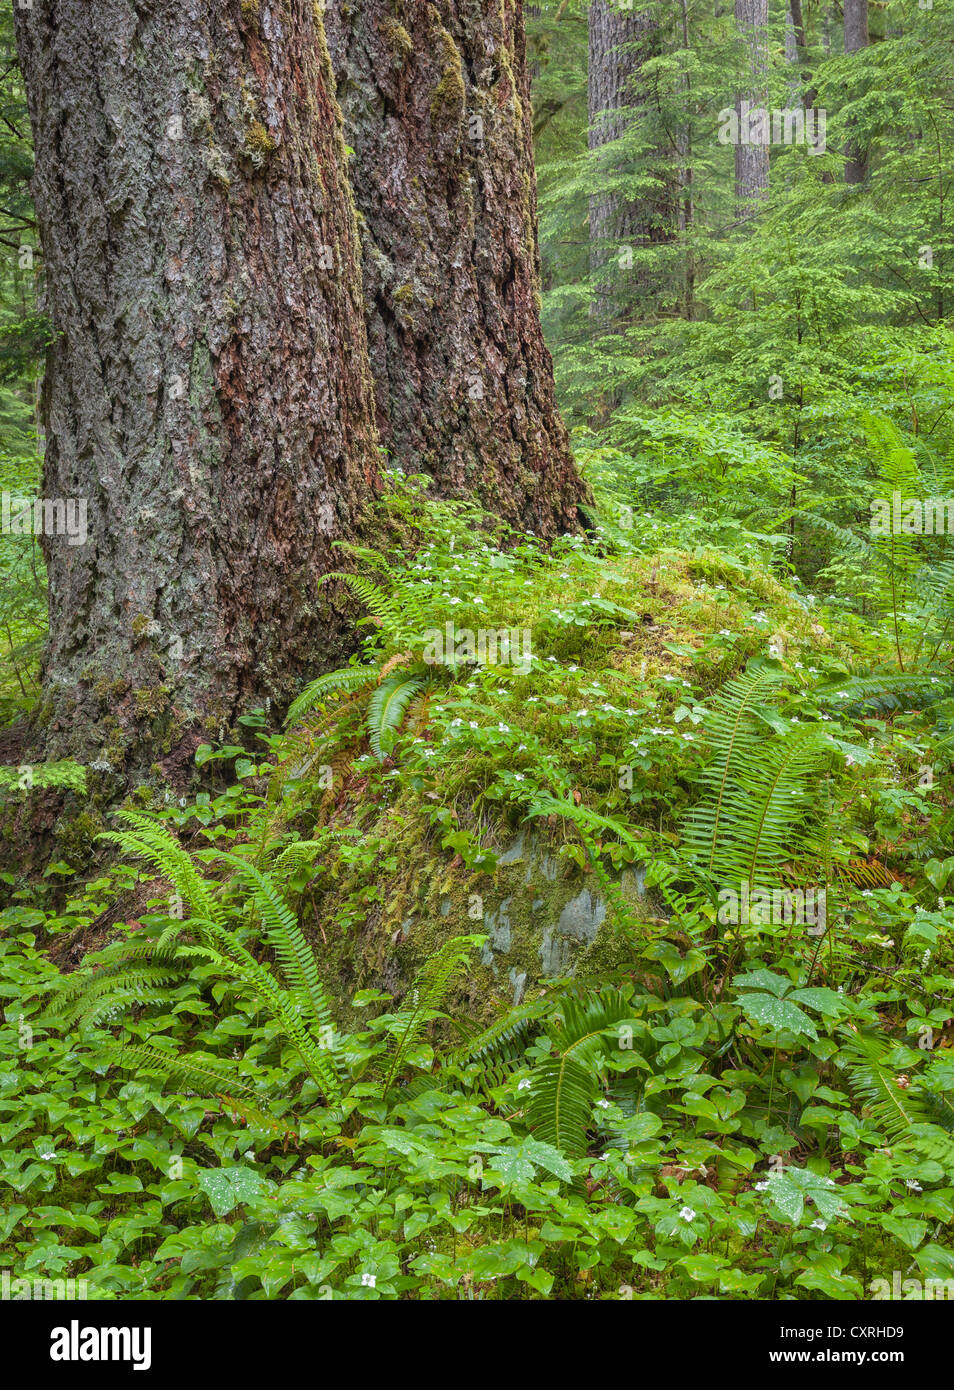 Olympic National Park, Washington Flowering bunchberry and ferns under old growth Douglas fir trees in the Sol Duc Valley Stock Photo